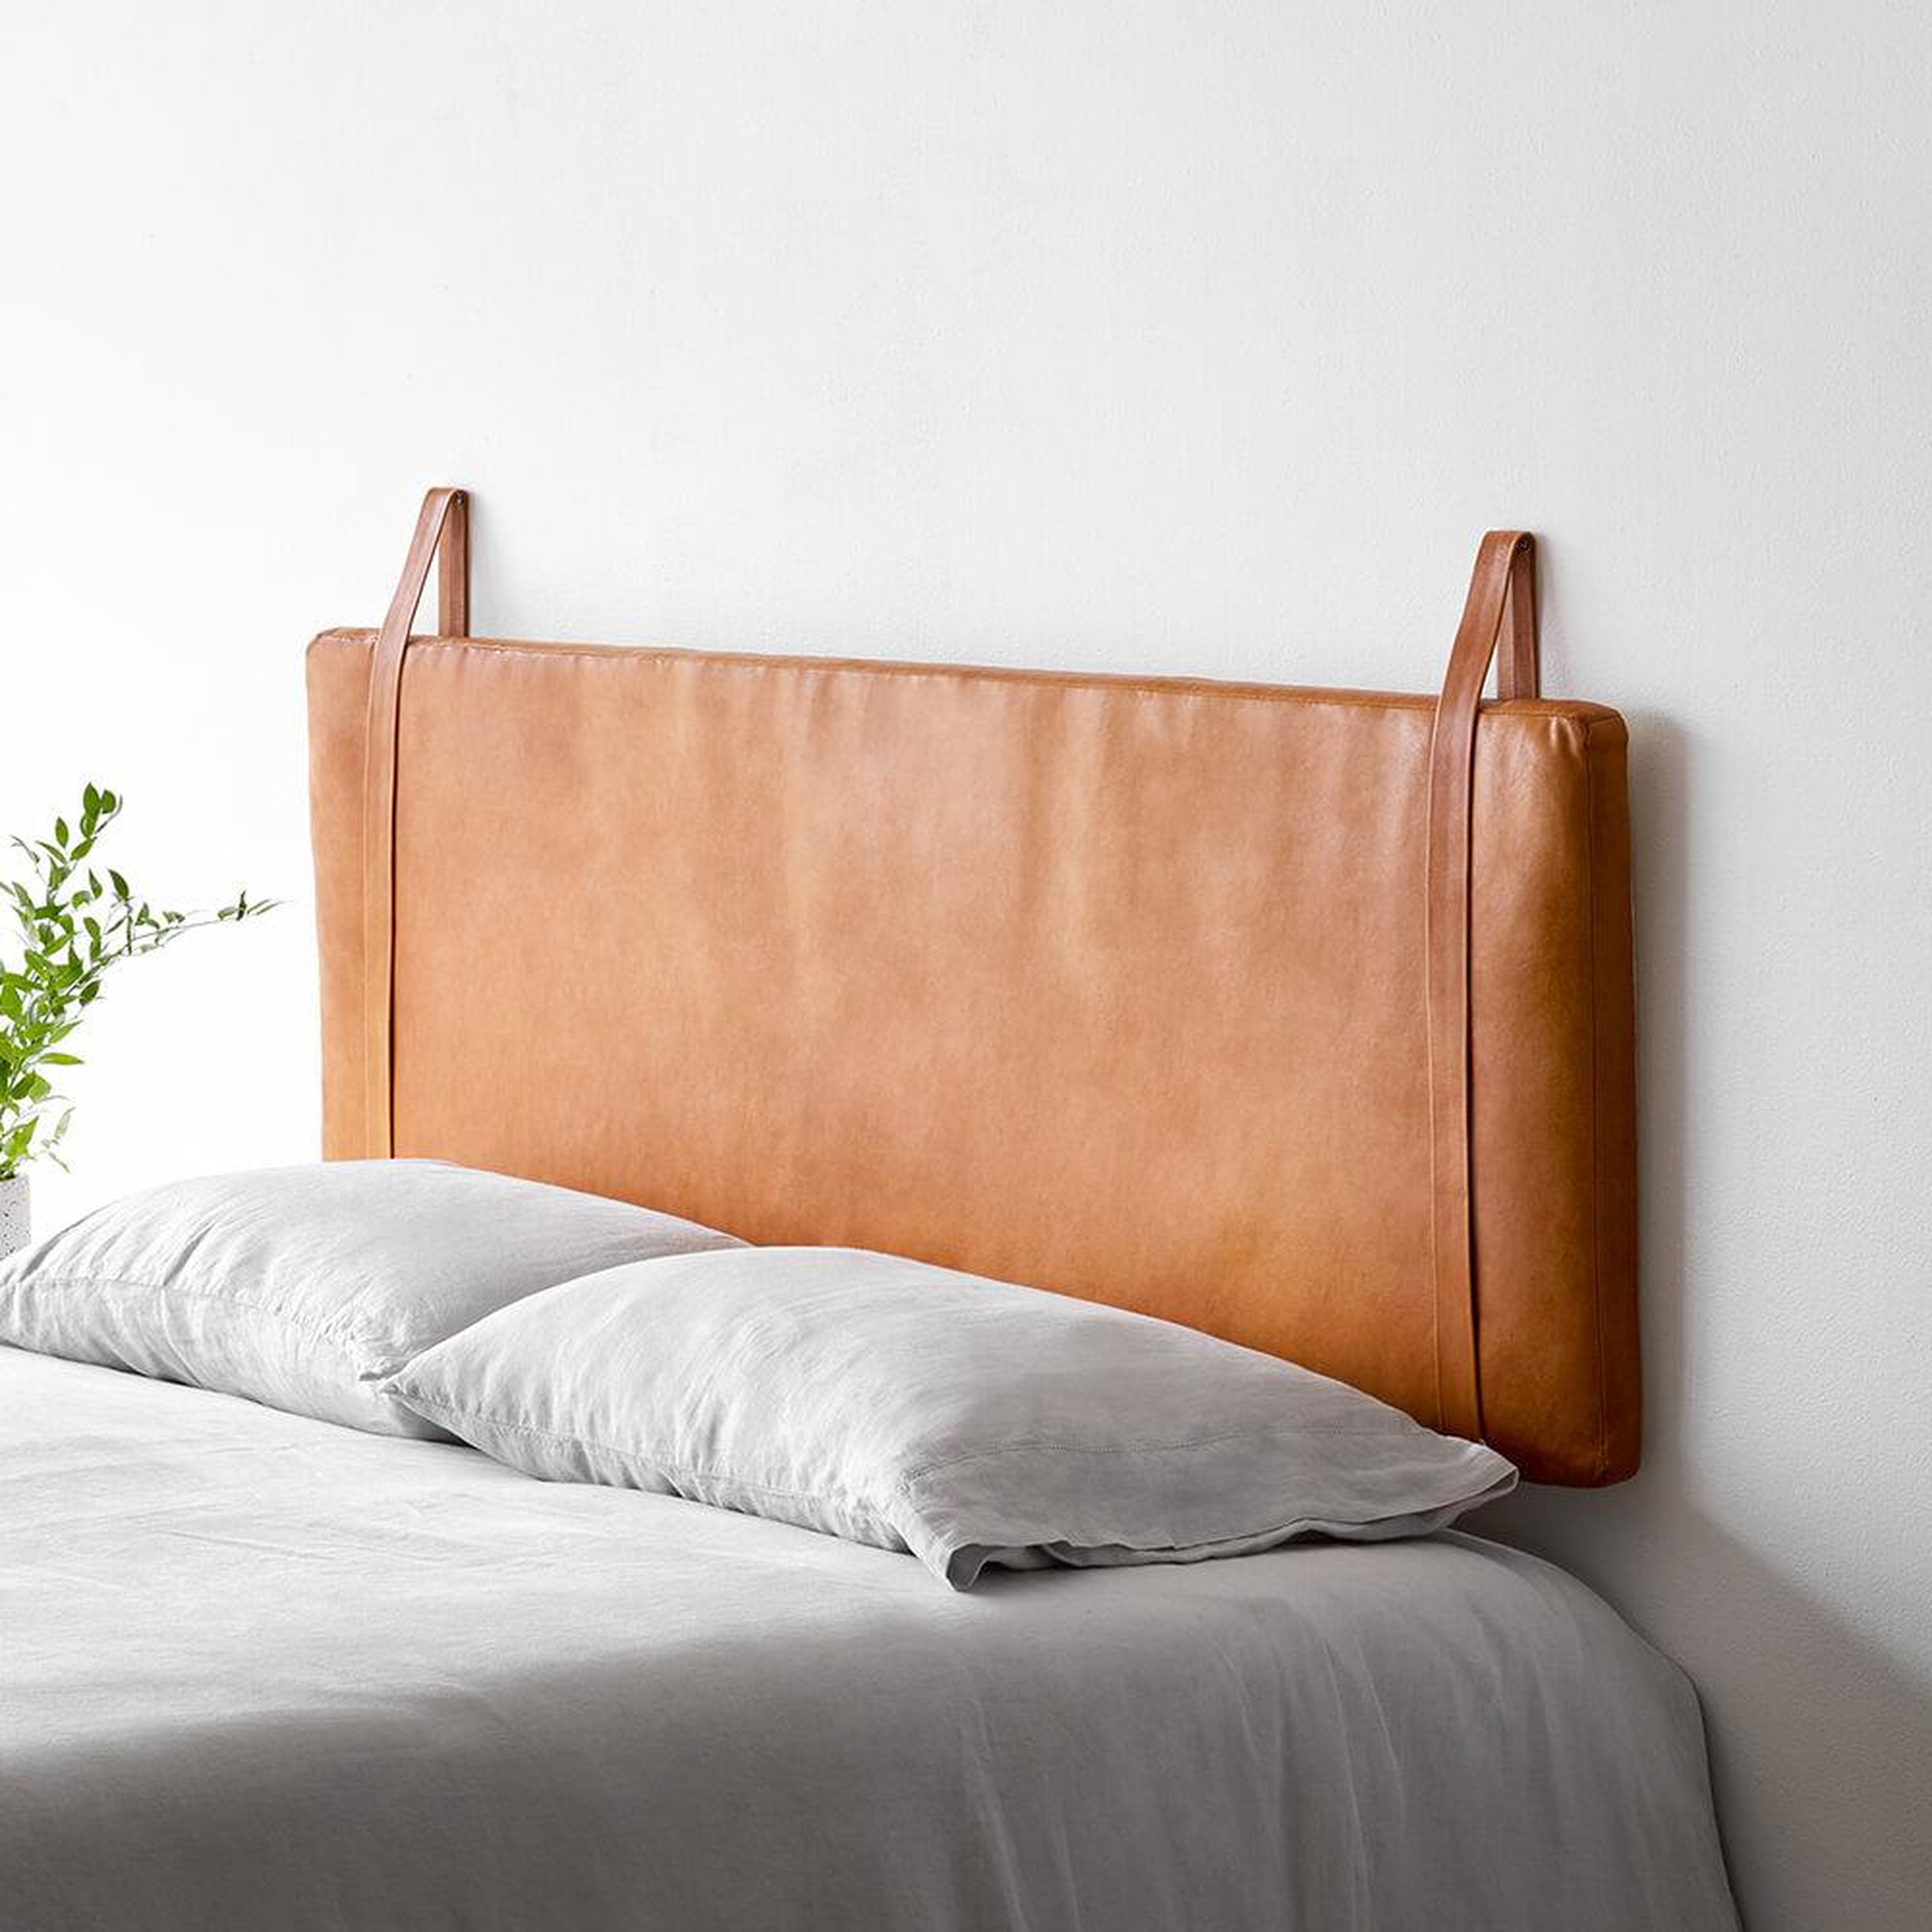 Hanging Leather Headboard - Caramel - King/Cali King By The Citizenry - The Citizenry